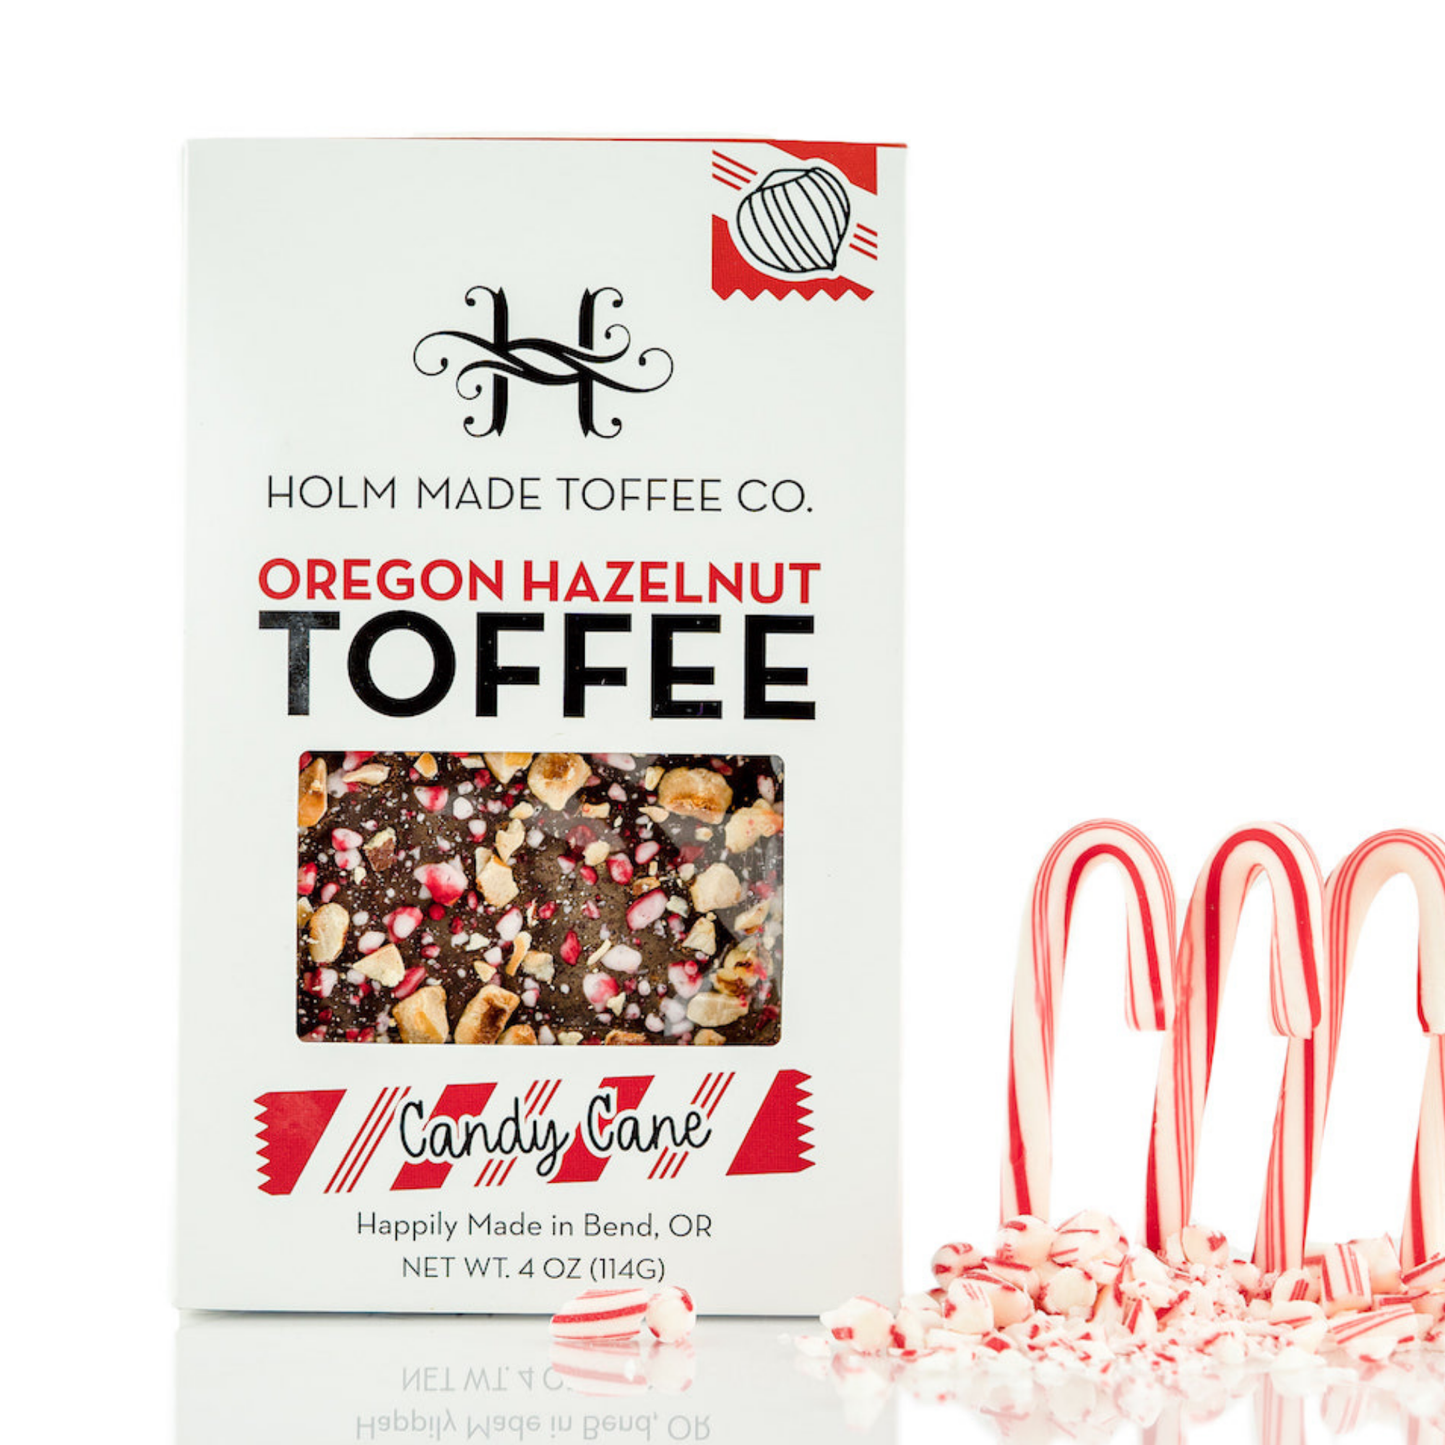 Holm Made Toffee Co. - HOLIDAY Flavors - Oregon Hazelnut Toffee